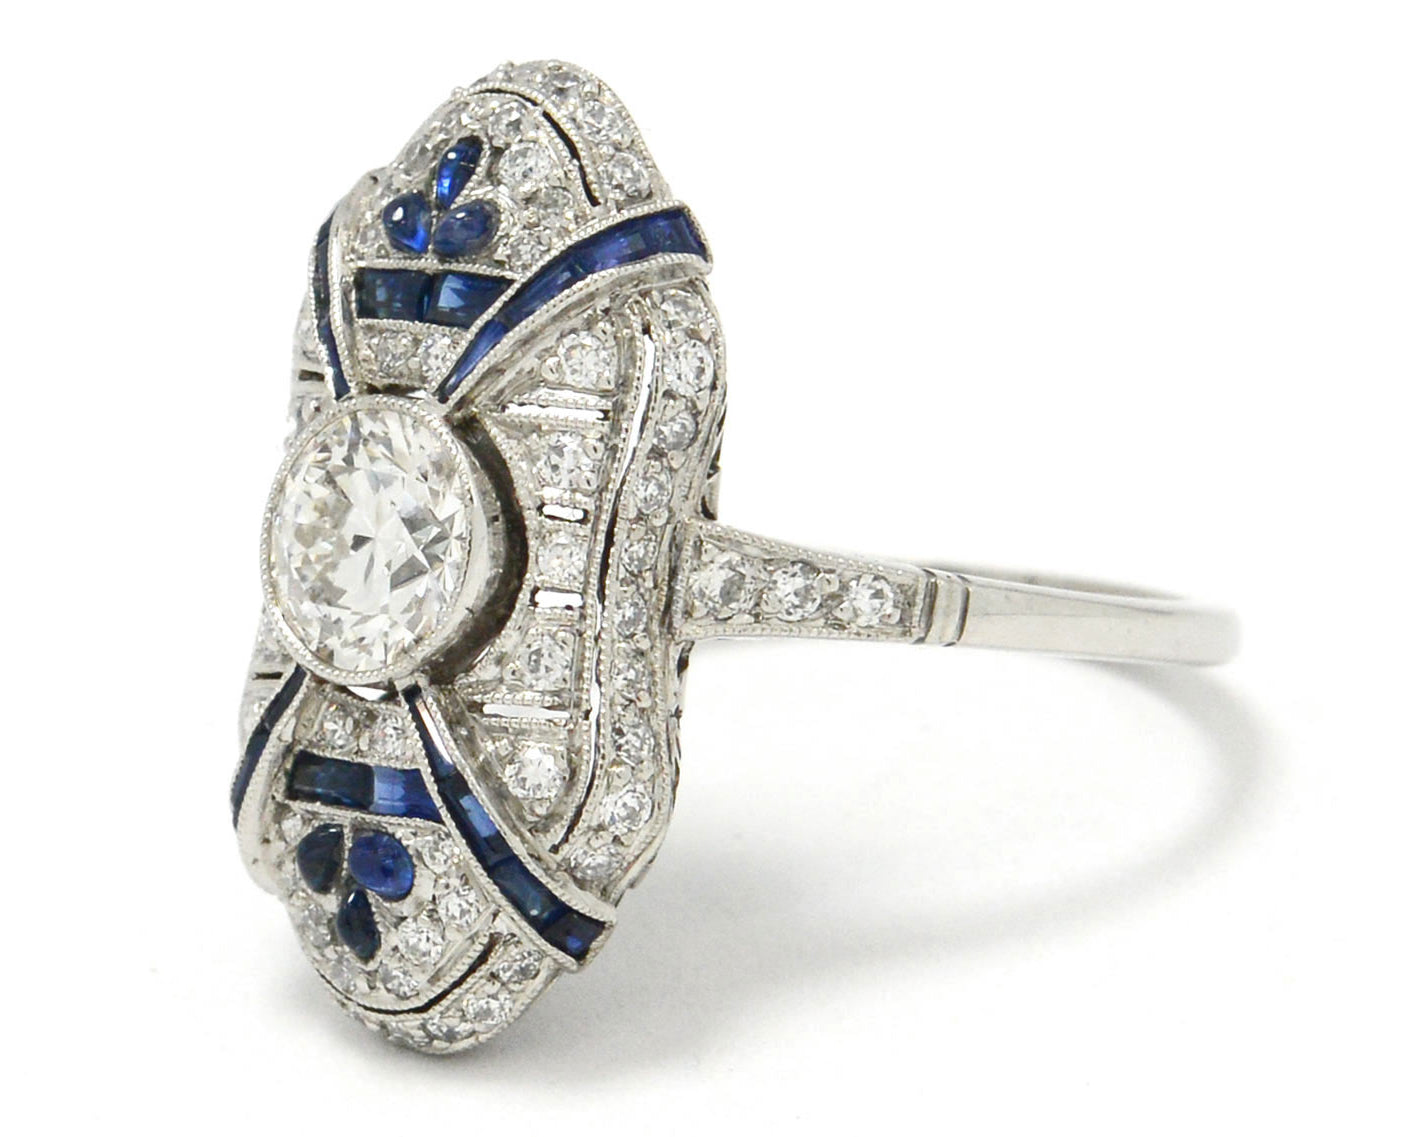 The 1 carat round diamond is accented by blue sapphires.